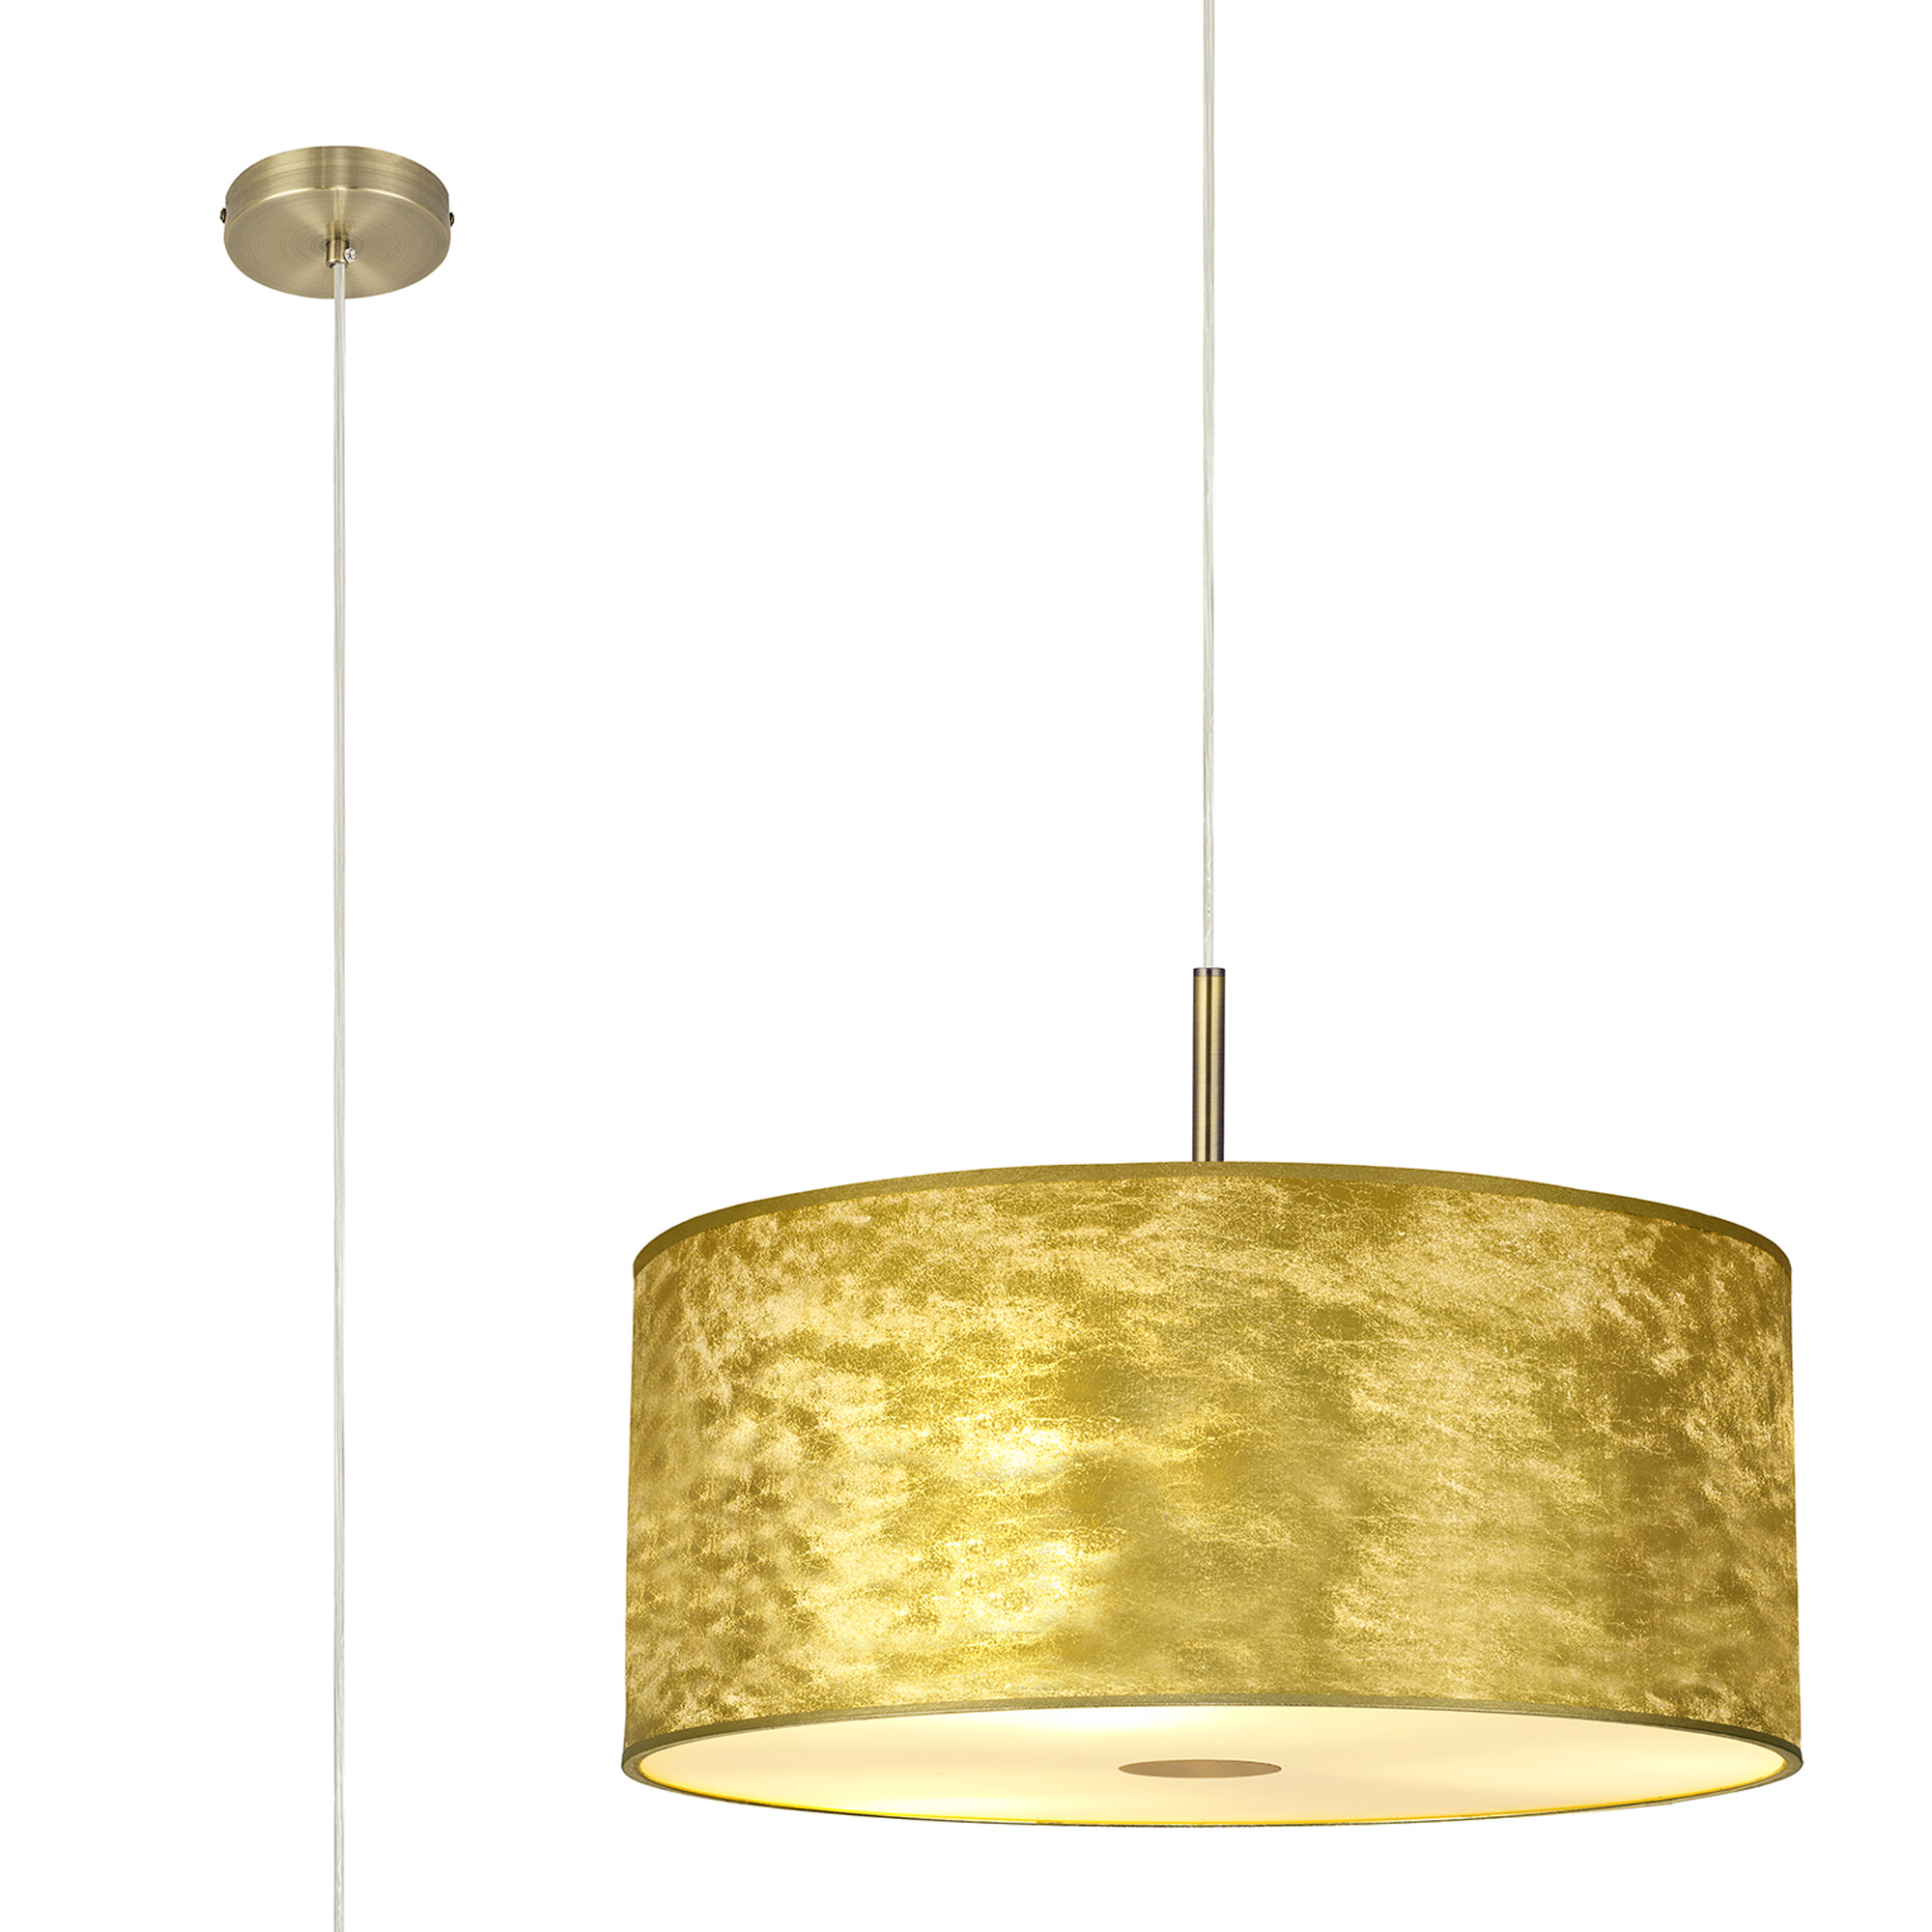 Baymont 60cm 5 Light Pendant Antique Brass; Gold Leaf; Frosted Diffuser